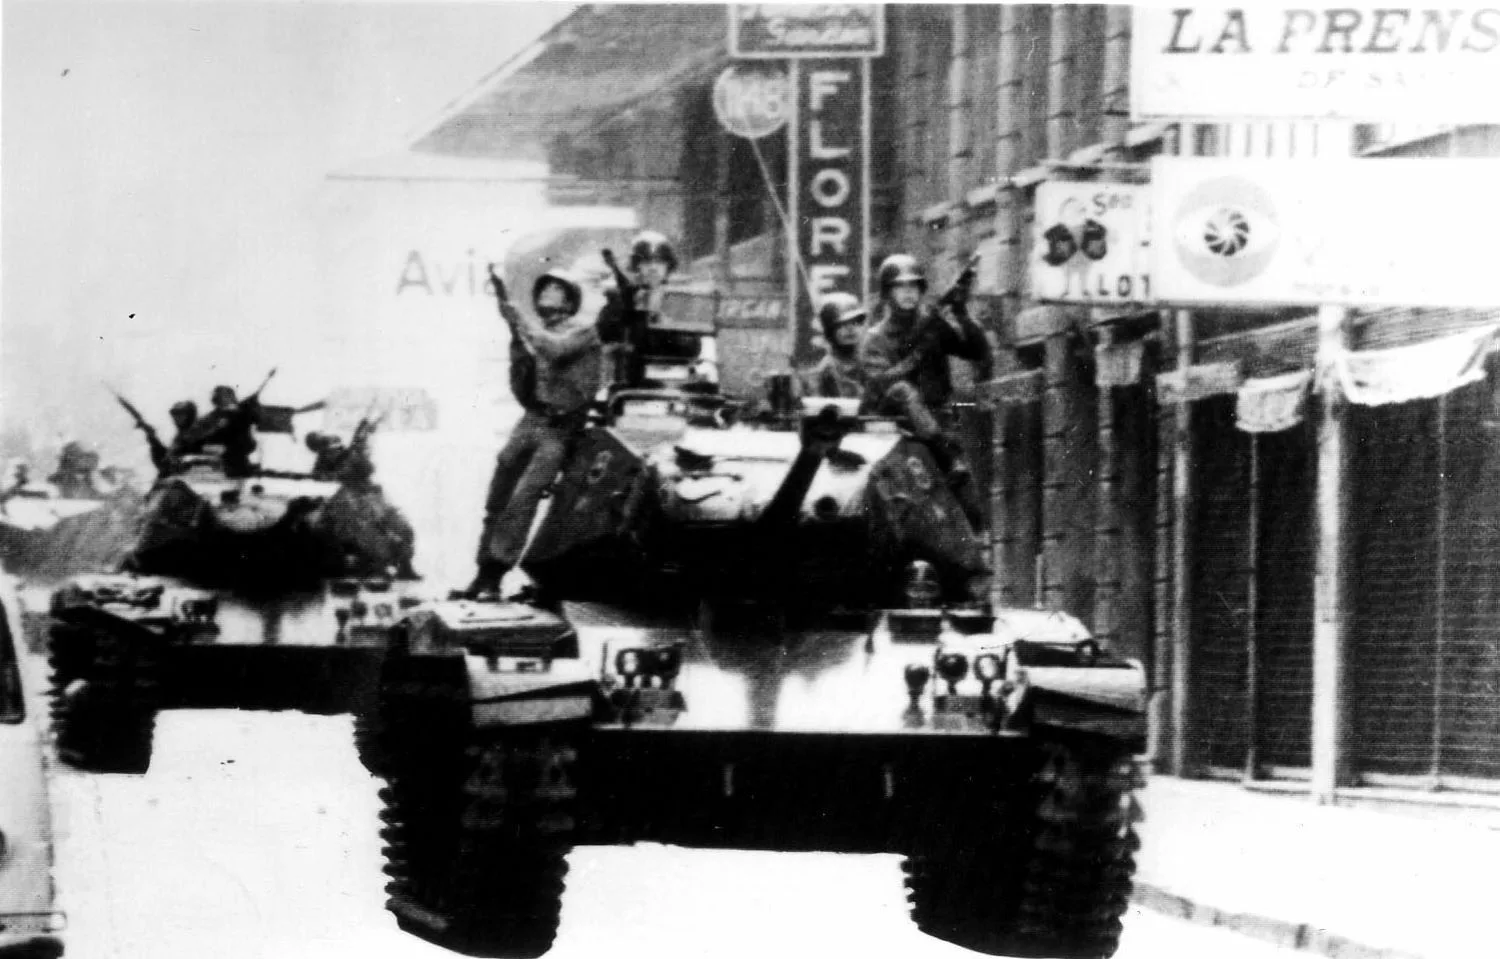 The Battle of Chile: Army Tanks in Street